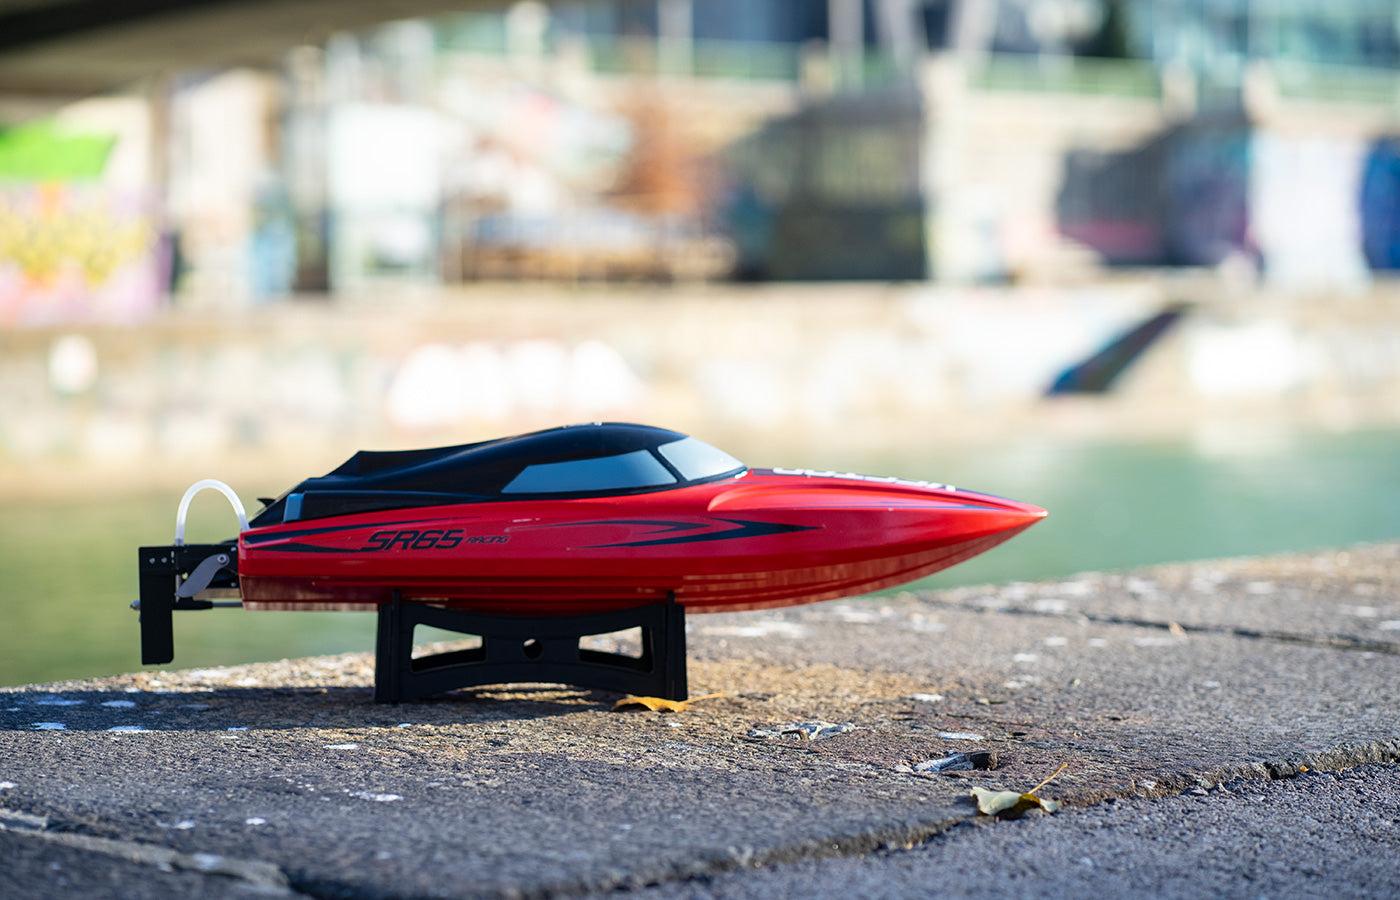 Tiny Remote Control Boat: Finding the Perfect Tiny Remote Control Boat for Your Boating Adventures